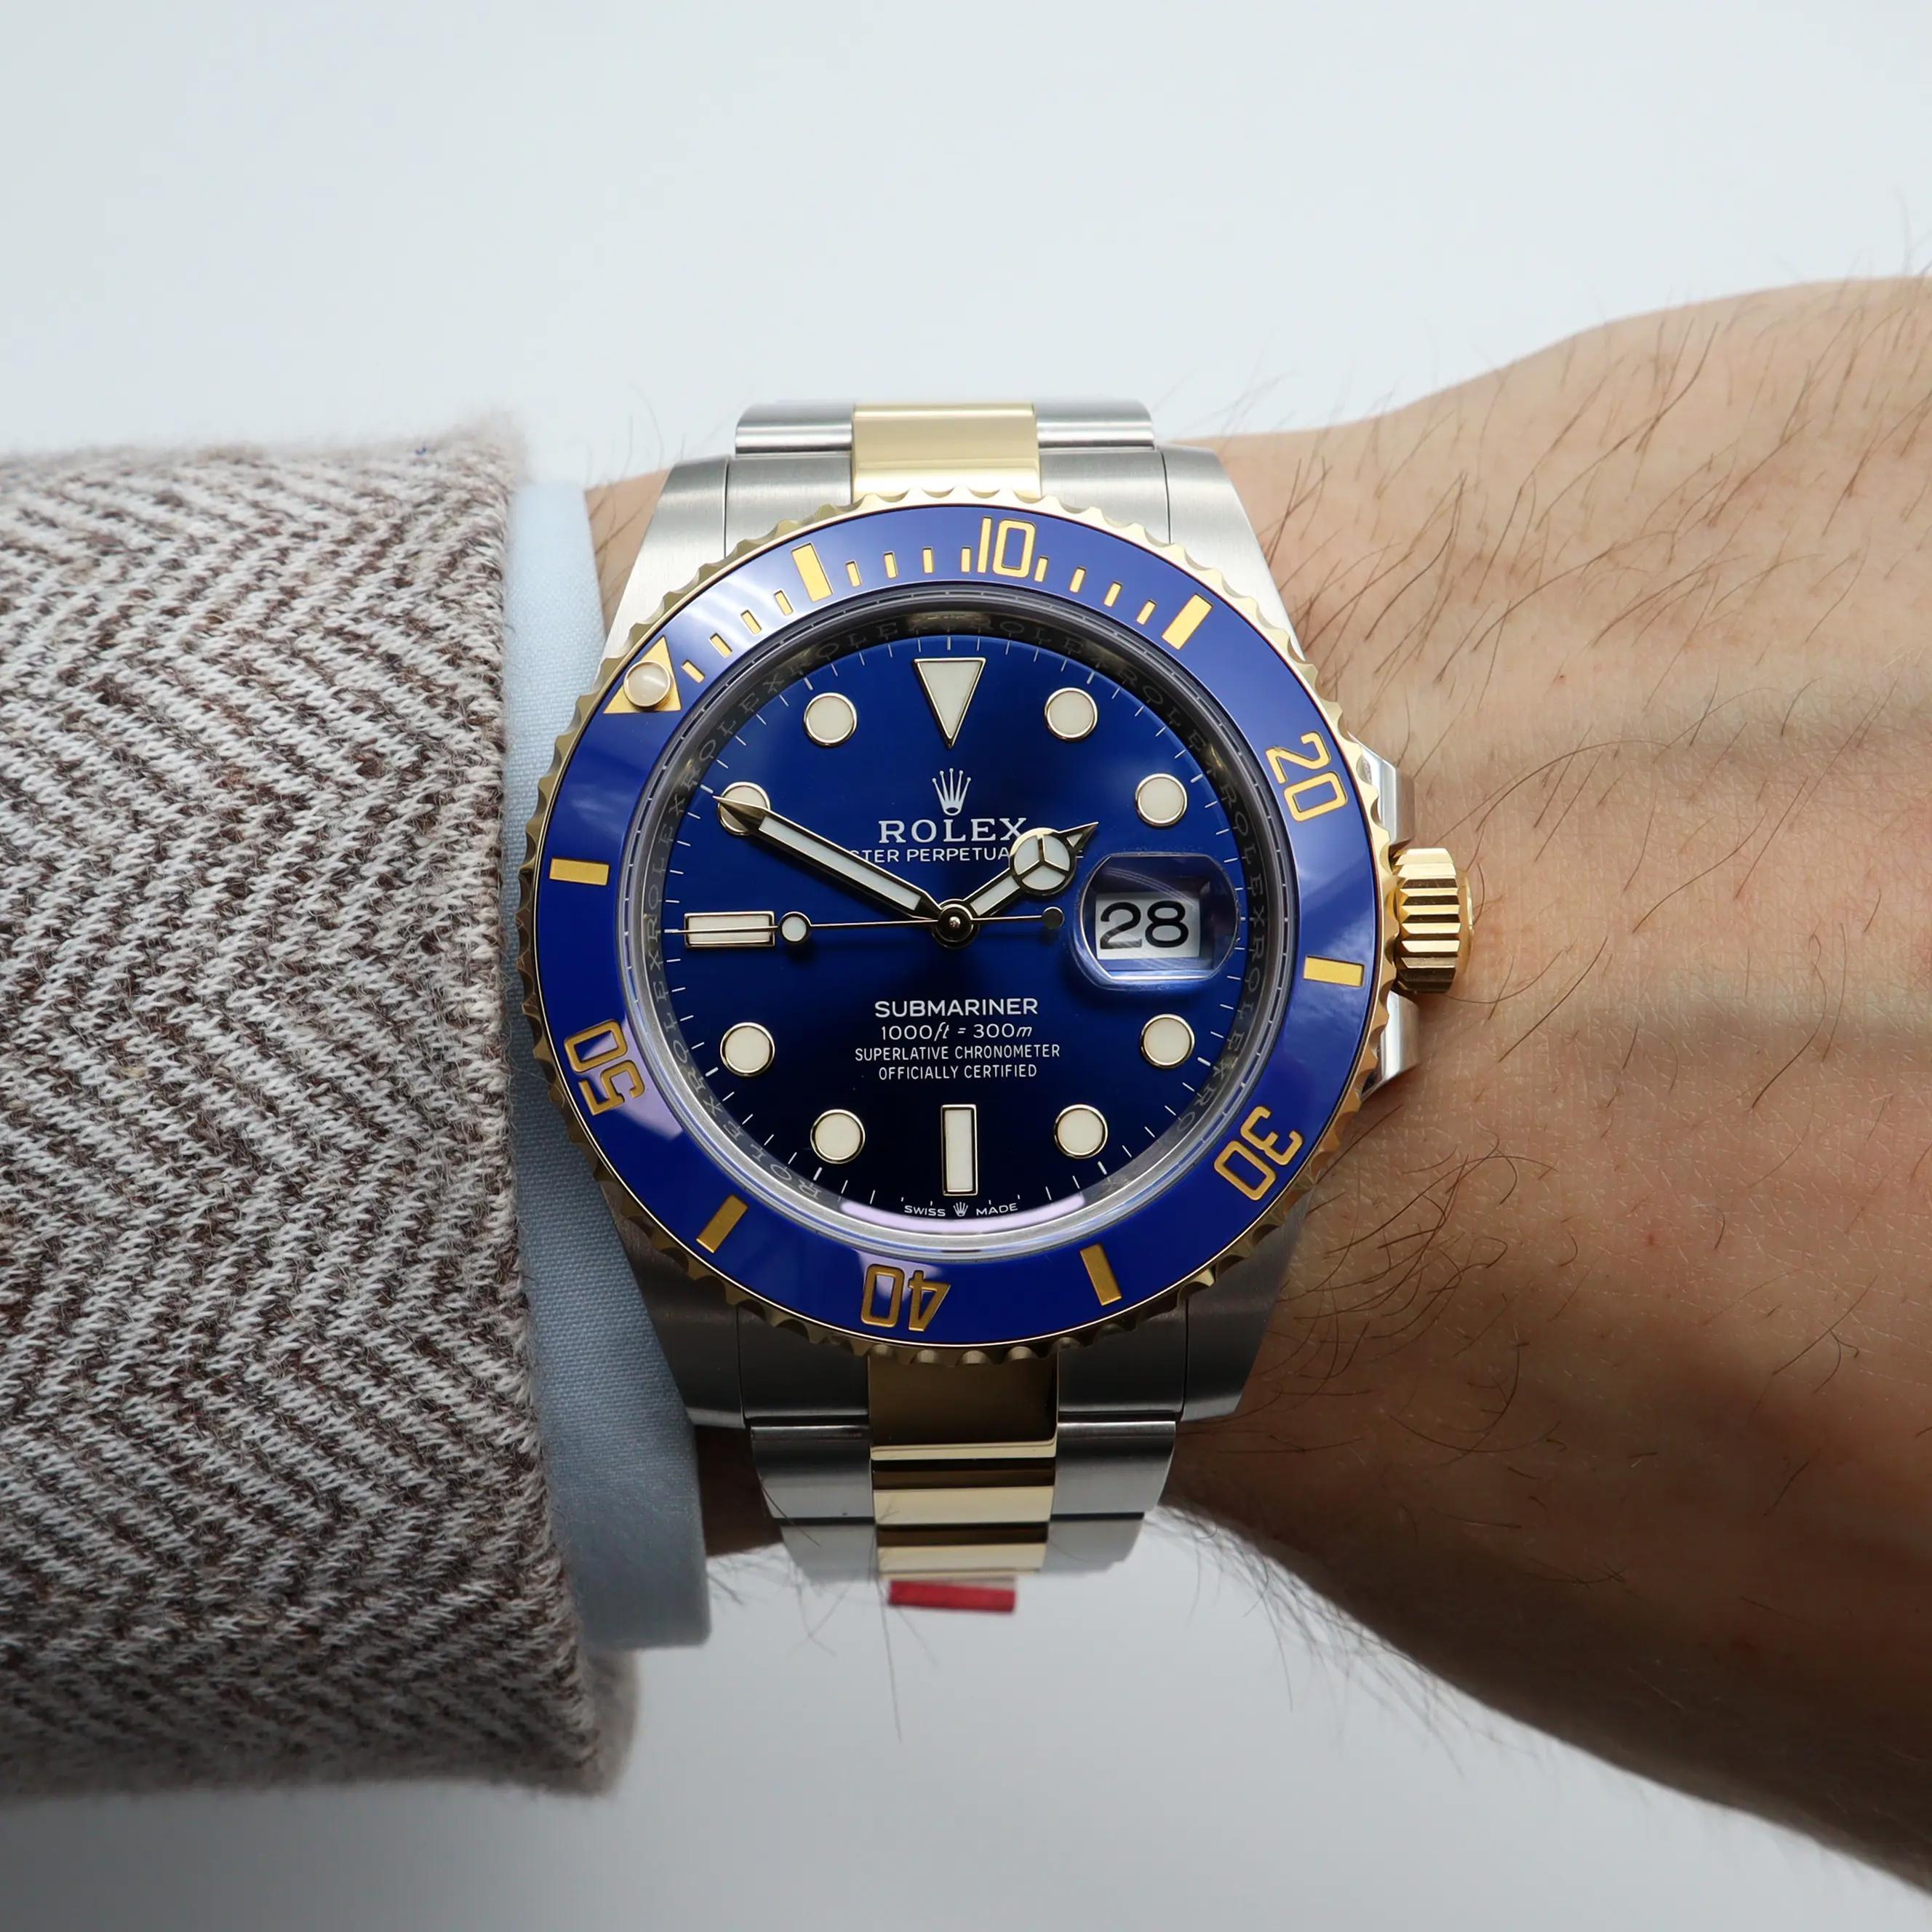 Rolex Submariner Steel 18K Yellow Gold Blue Dial Automatic Watch 126613LB For Sale 1